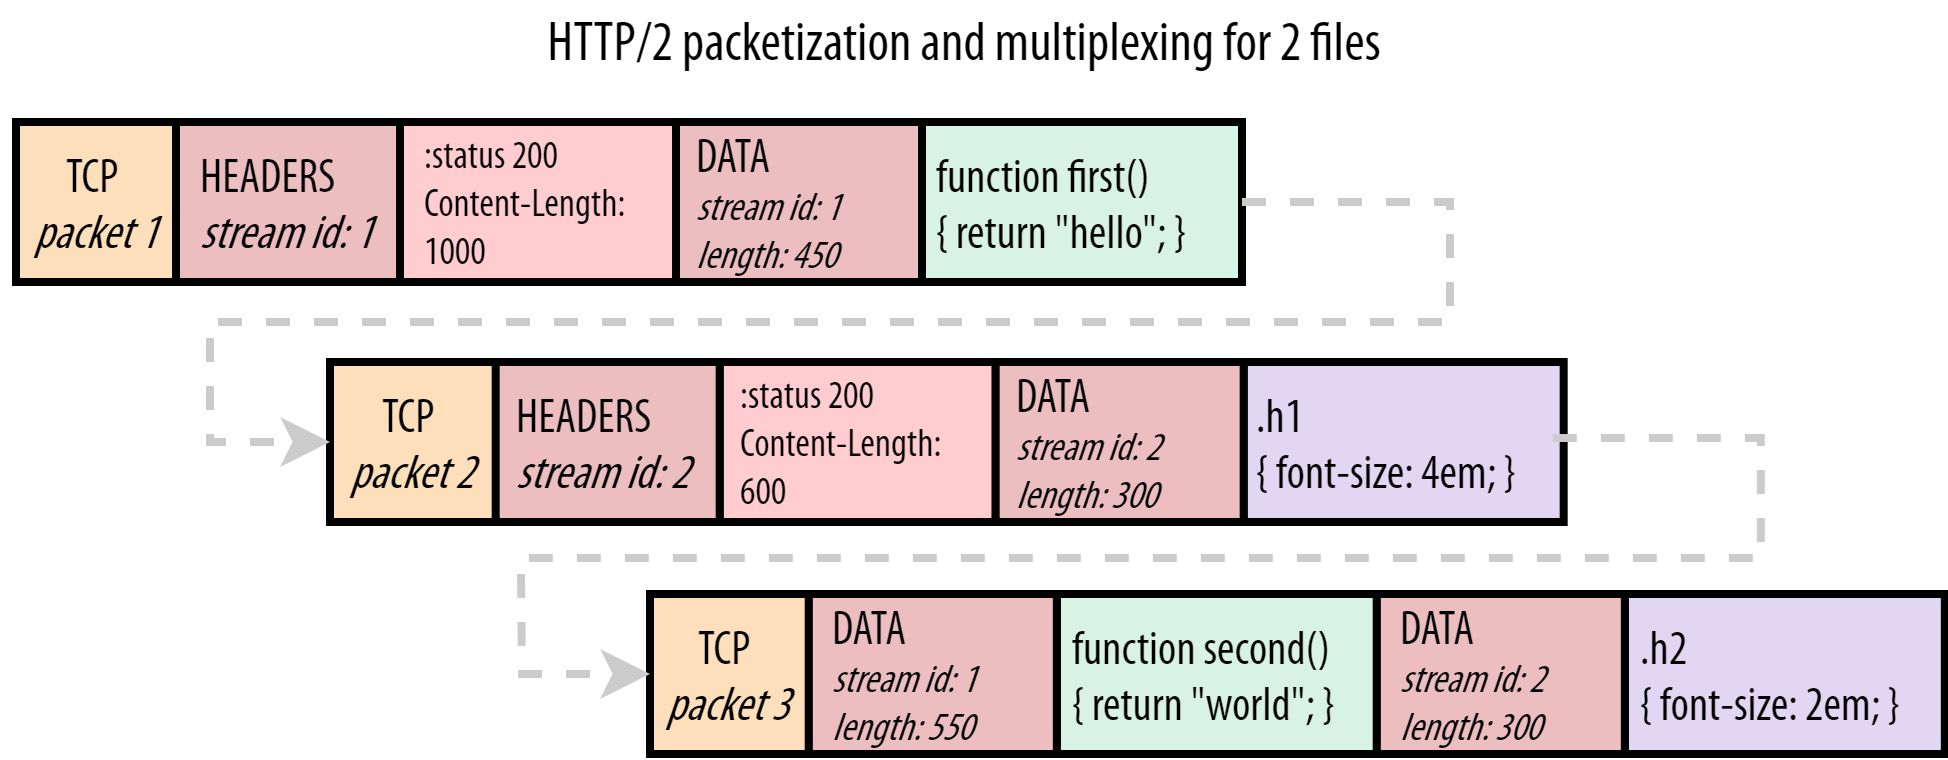 multiplexed server HTTP/2 responses for script.js and style.css